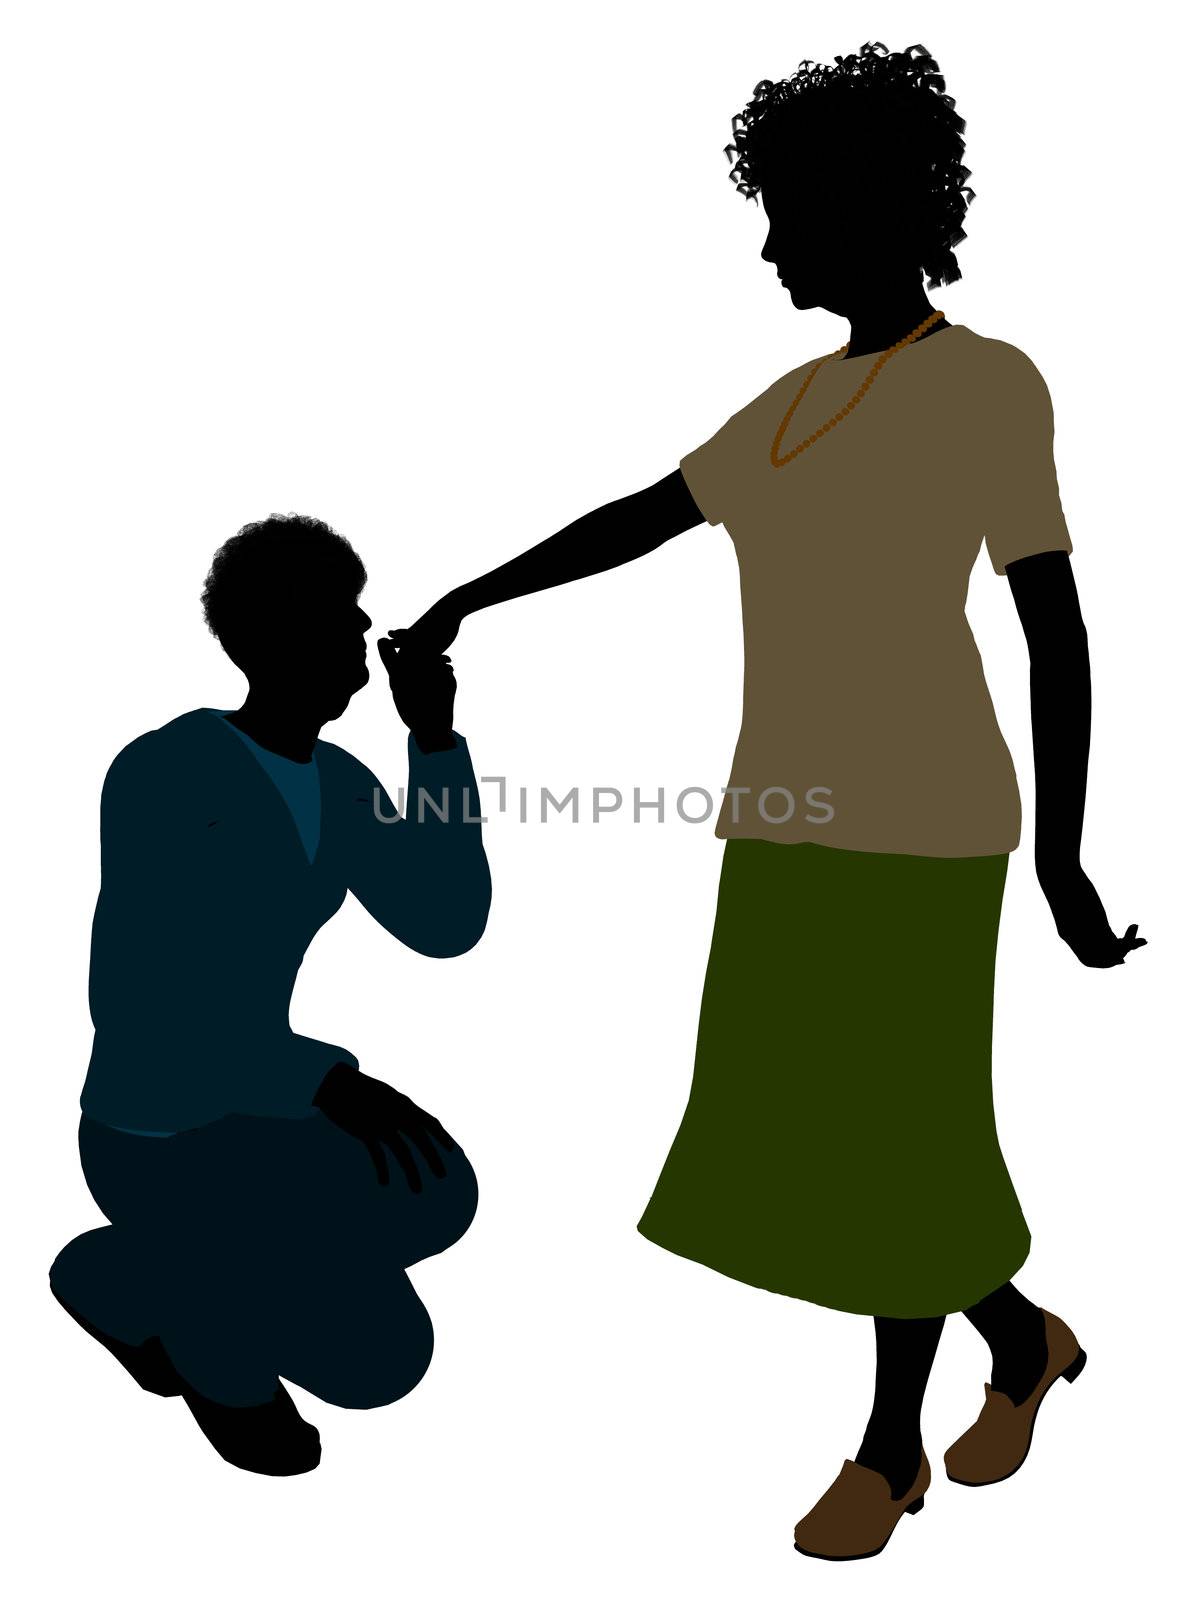 African American Senior Couple Illustration Silhouette by kathygold